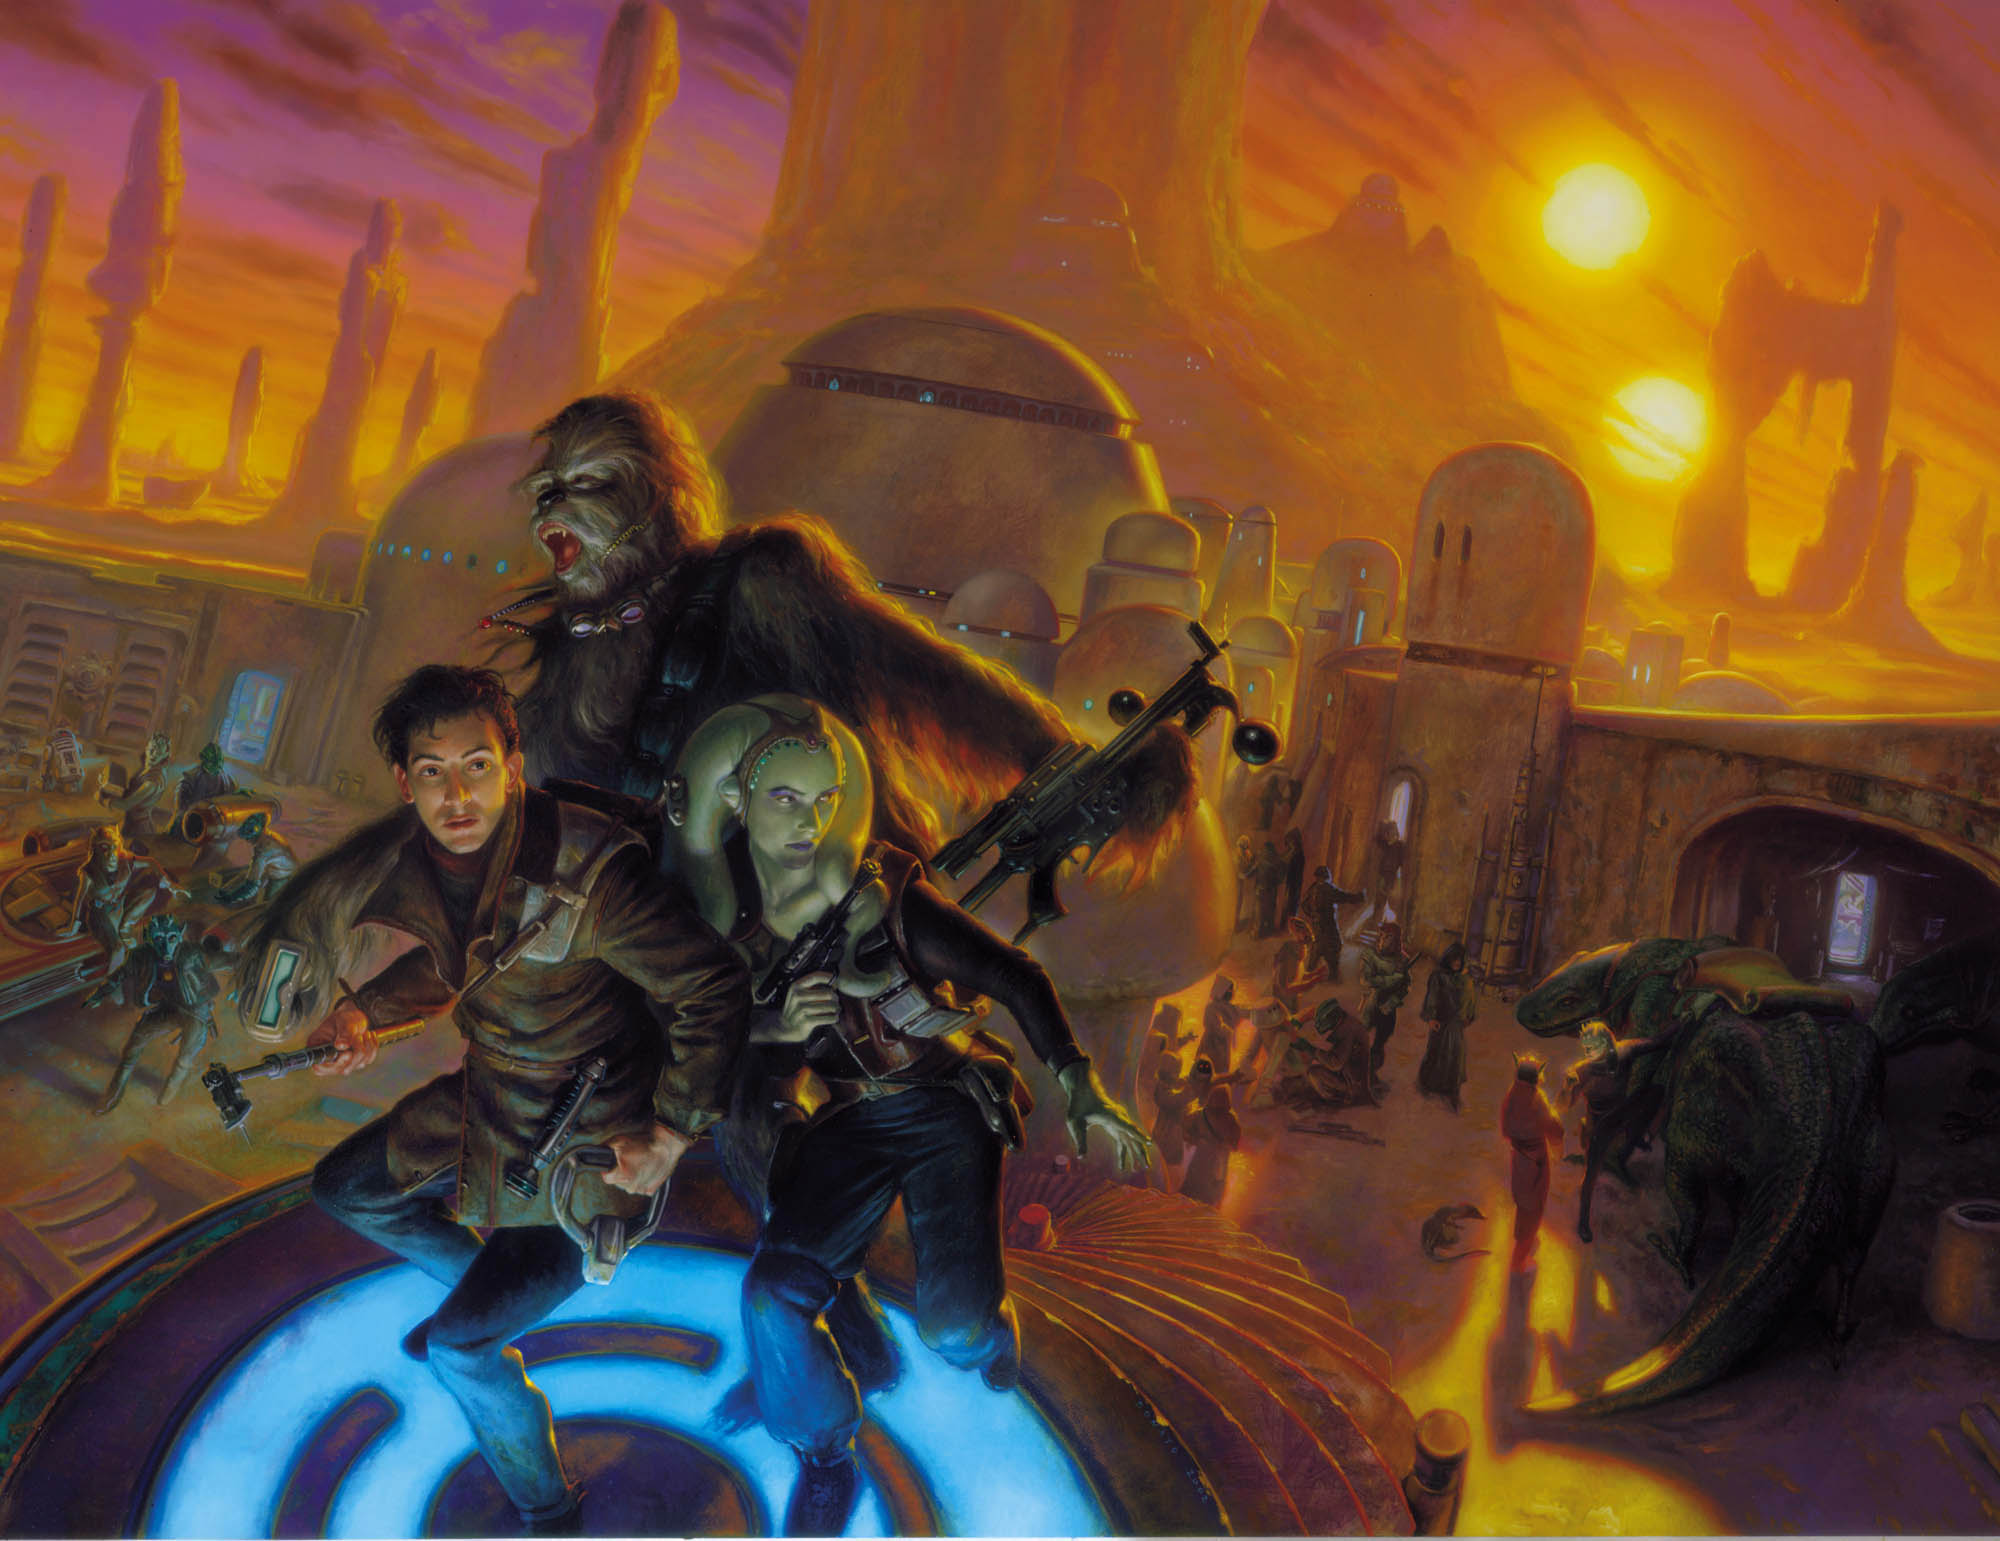 Star Wars Galaxies
33" x 45"  Oil on Panel 2002
Advertising illustration for the video game by Lucas Arts